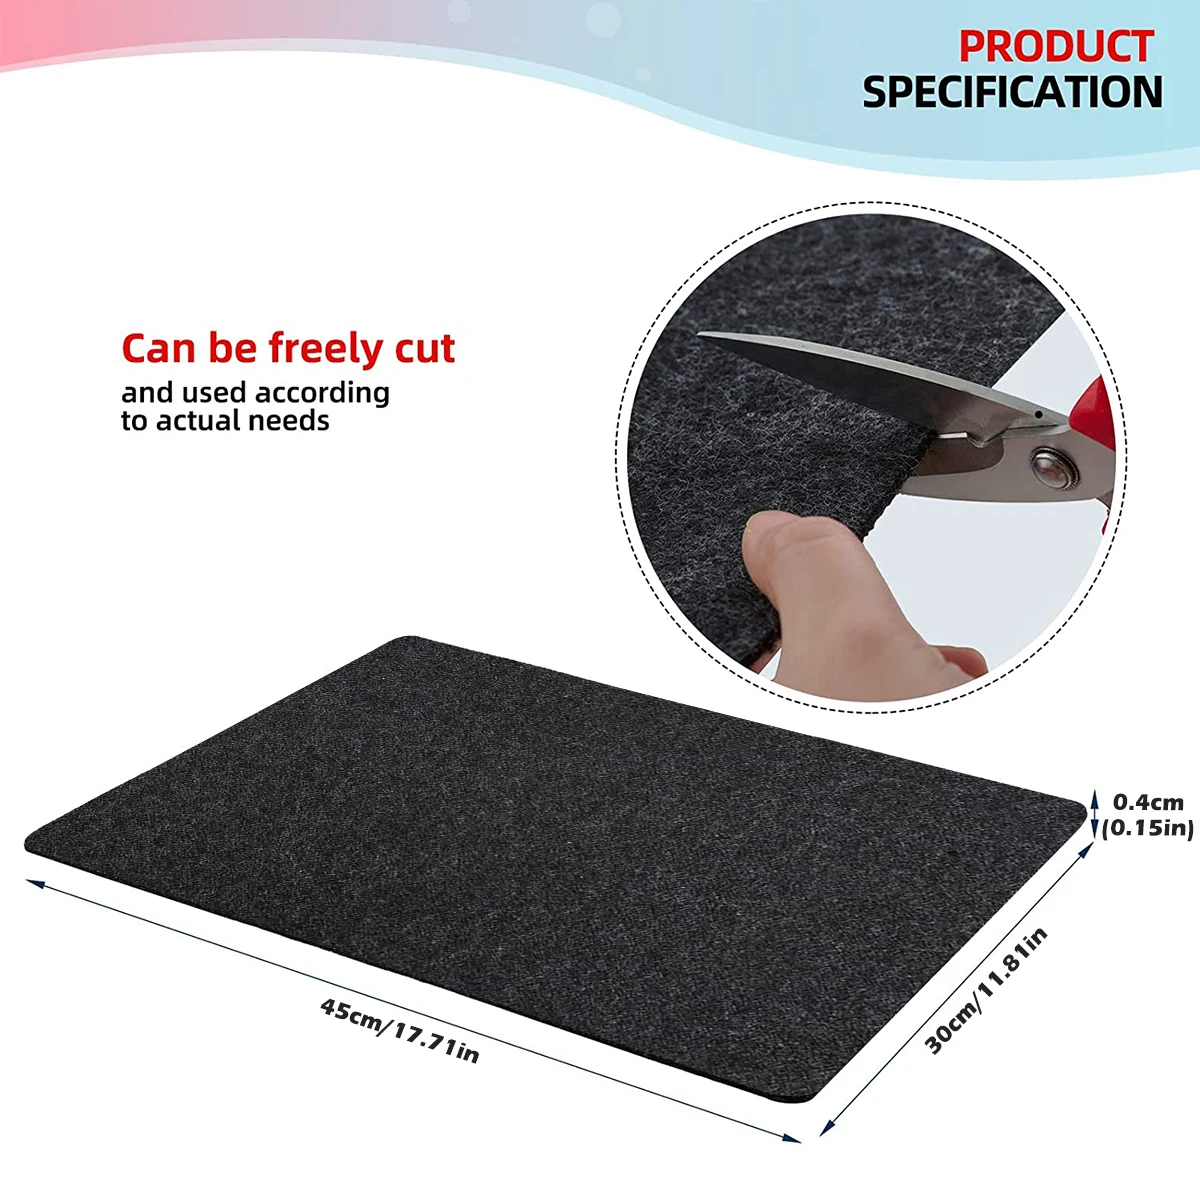 https://ae01.alicdn.com/kf/S4804c0c10d4f472eb10cc0348d0e6f68d/2Pc-Air-Fryer-Coffee-Maker-Heat-Resistant-Pad-Counter-Mat-Countertop-Protector-Non-slip-Appliance-Moving.jpg